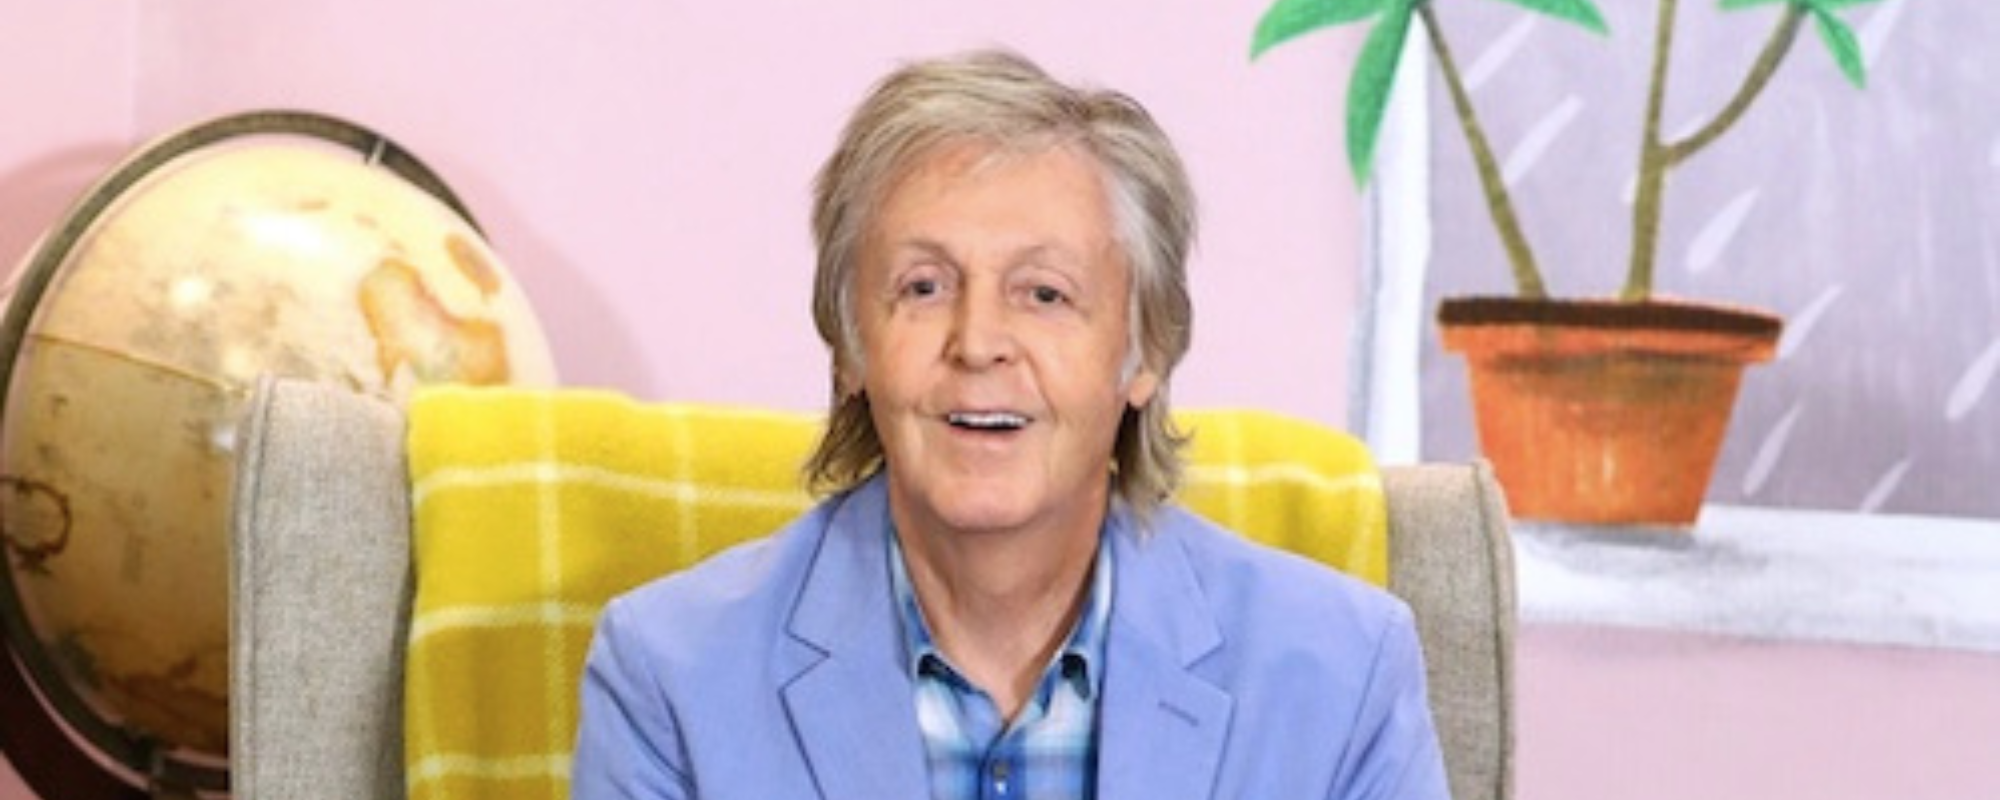 Unreleased Paul McCartney Tunes Included in New Compilation for Yoto Children’s Audio Players